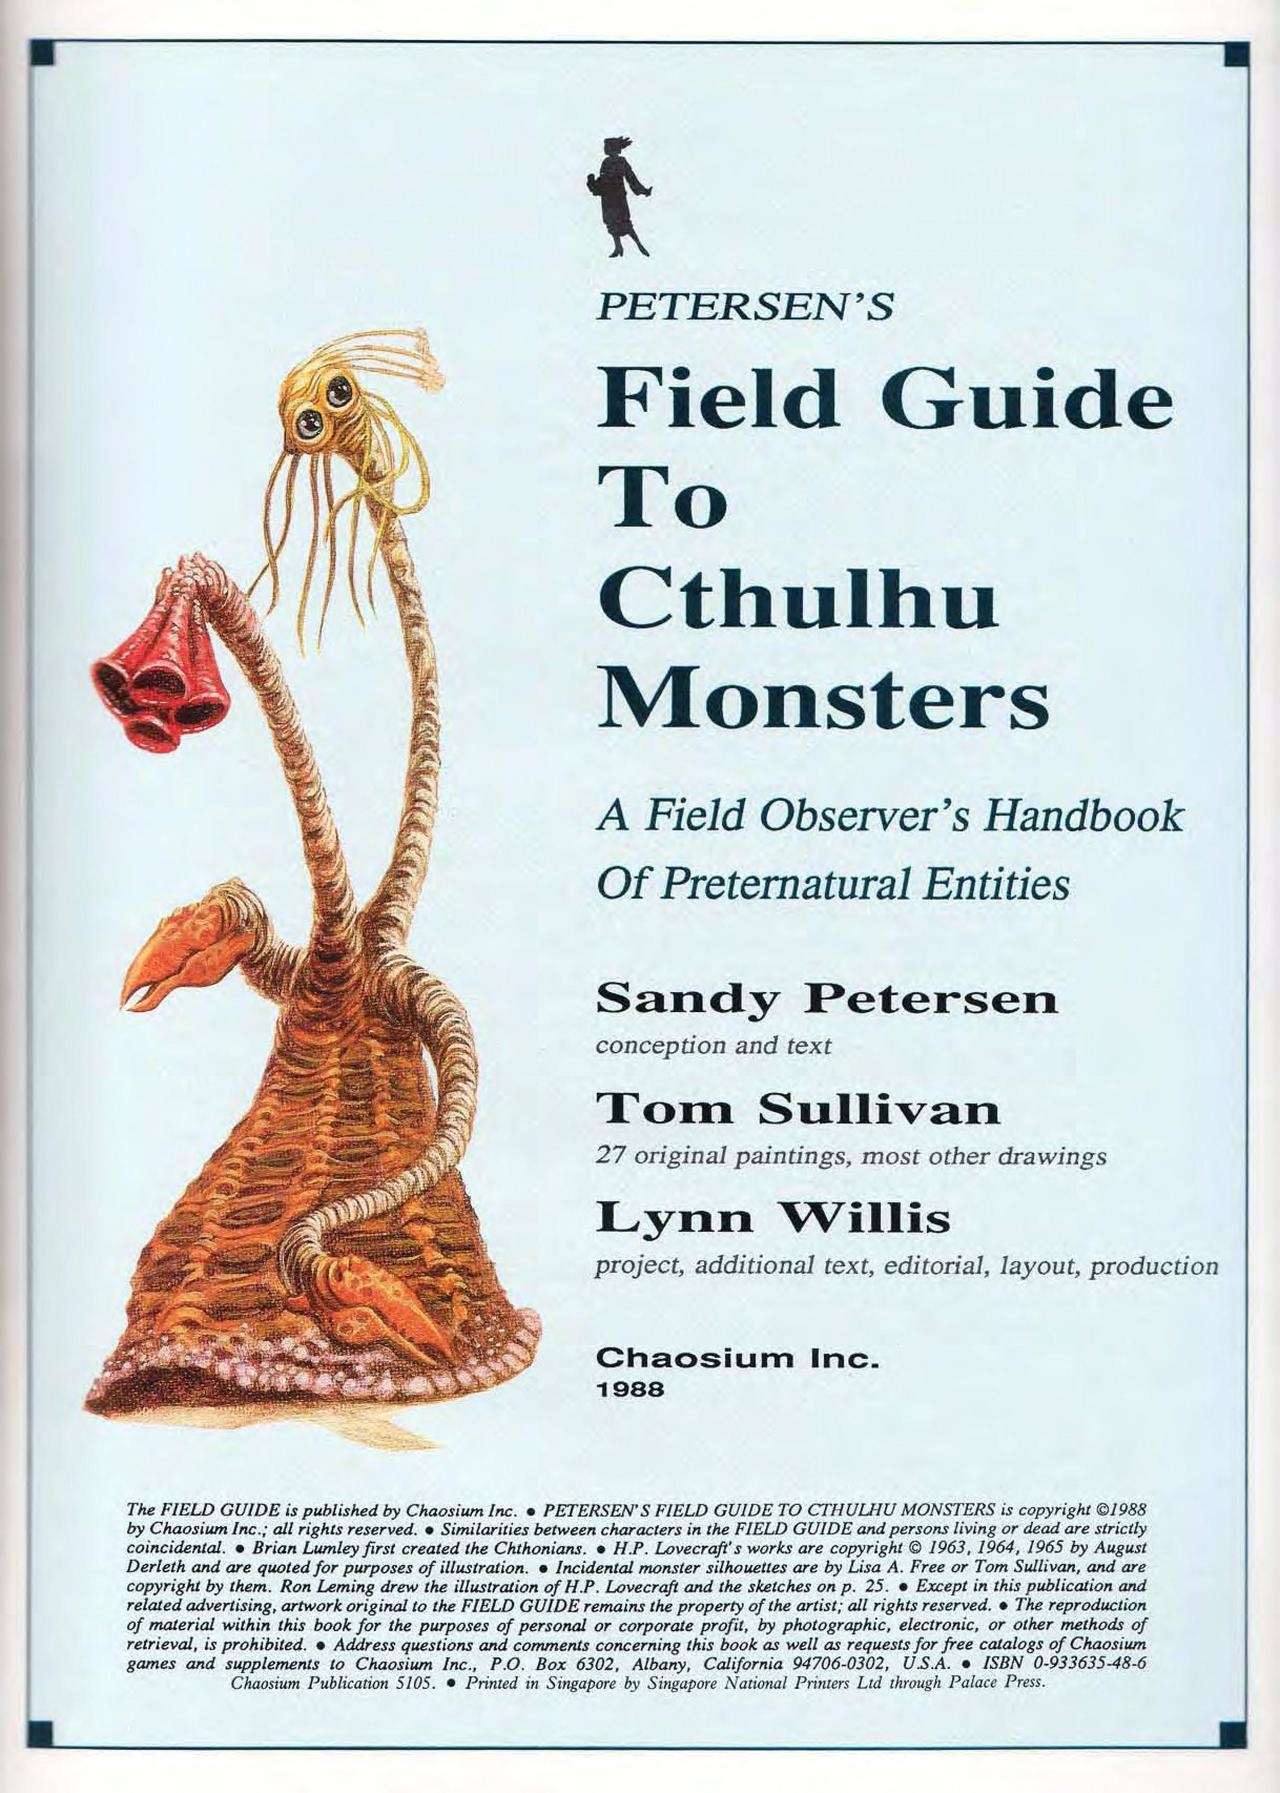 S. Petersen's Field Guide to Cthulhu Monsters 2